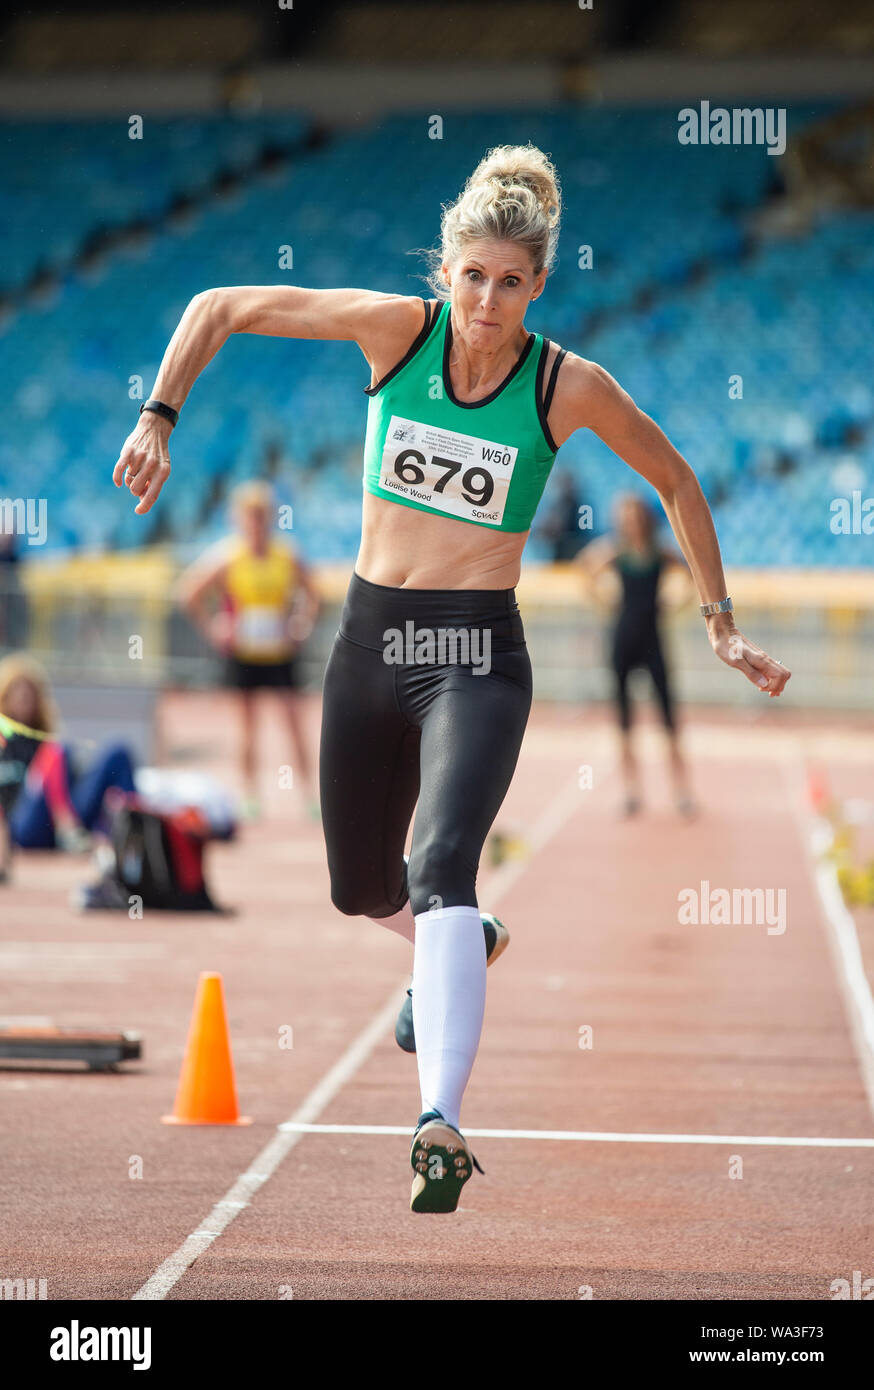 BIRMINGHAM - ENGLAND 10 AUG 2019: Louise Wood W50 competing in the Triple Jump on Day two of the British Master’s Championships, Alexander Stadium, Bi Stock Photo